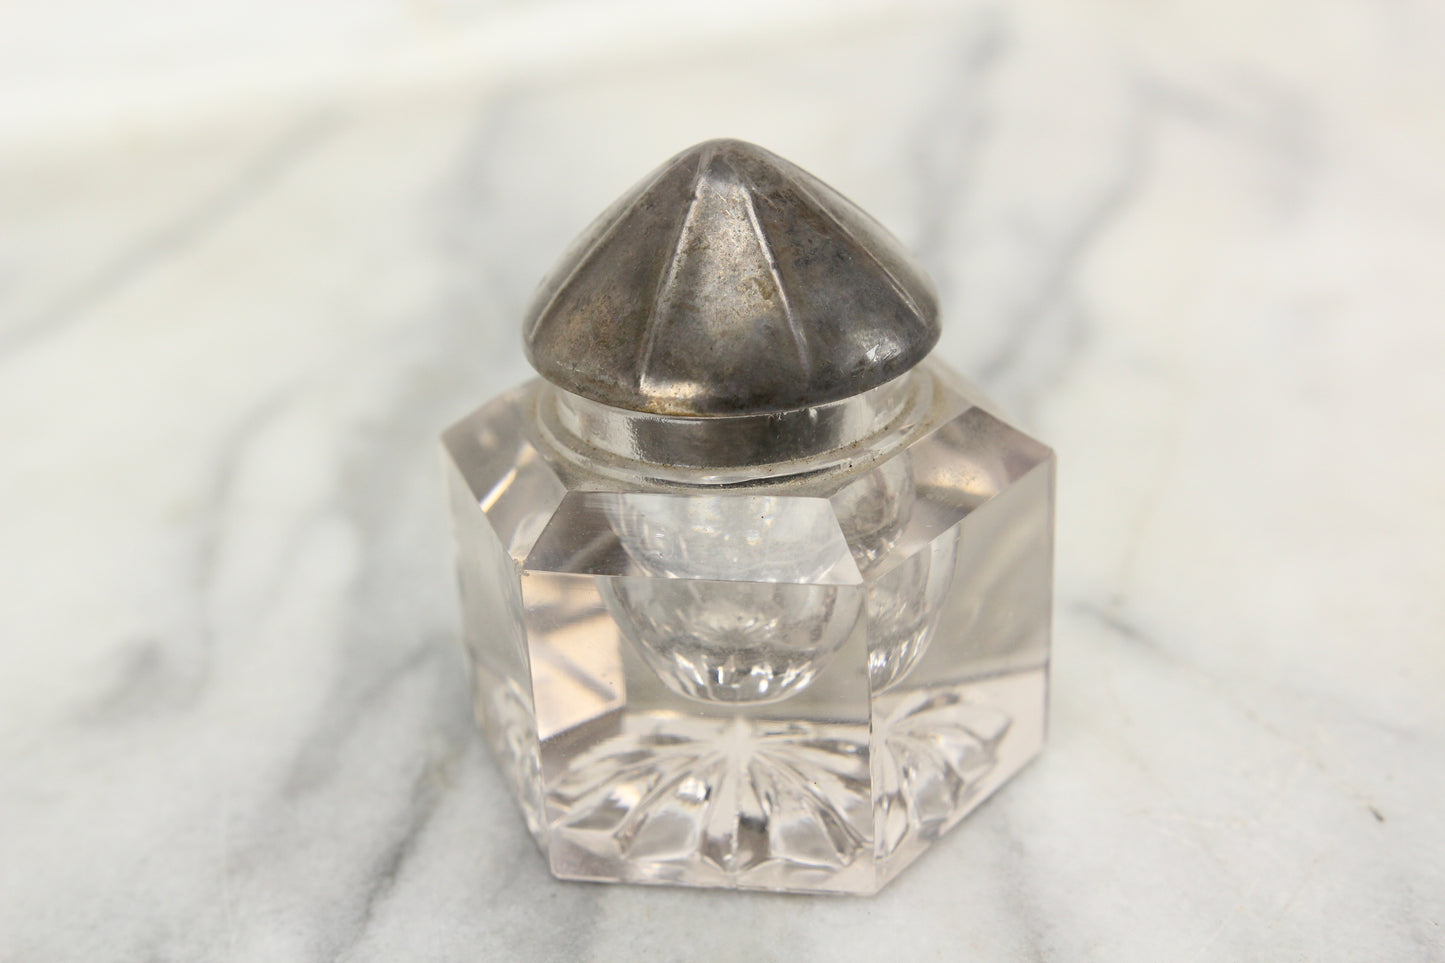 Antique Glass Hexagonal Inkwell with Sterling Silver Cone Top Lid